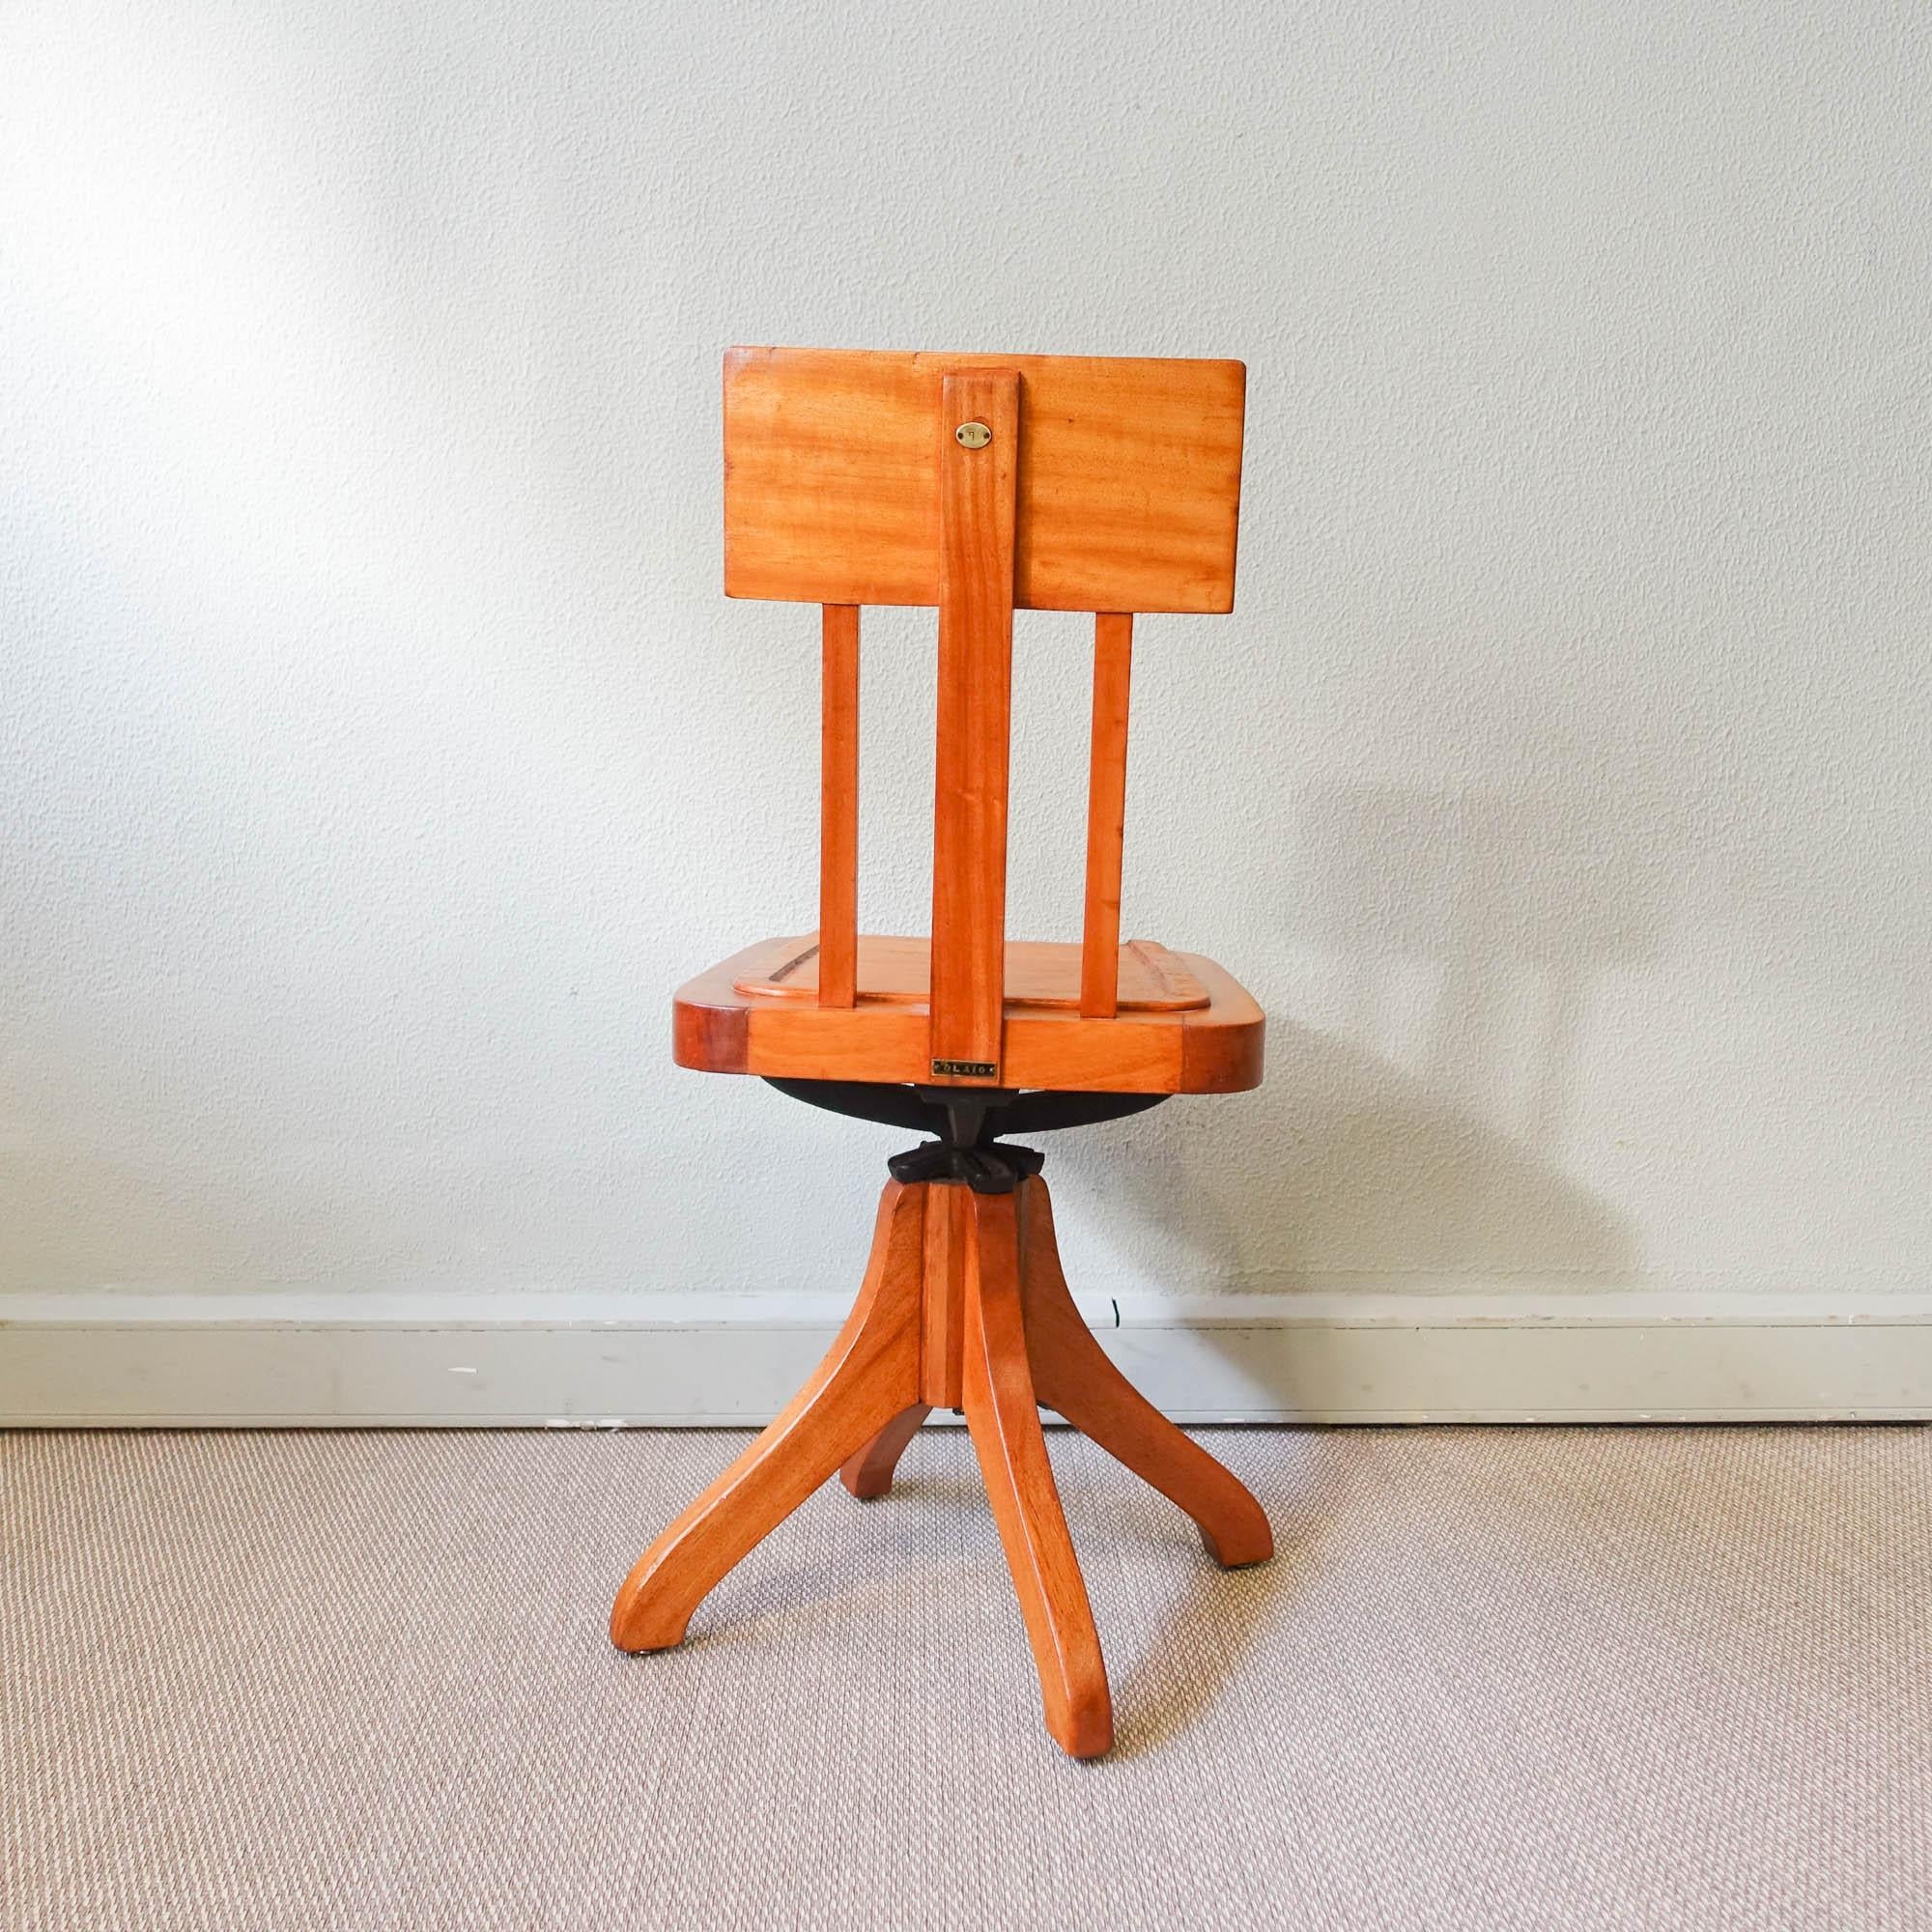 Portuguese Typist Chair, Model Simples, by Móveis Olaio, 1940's For Sale